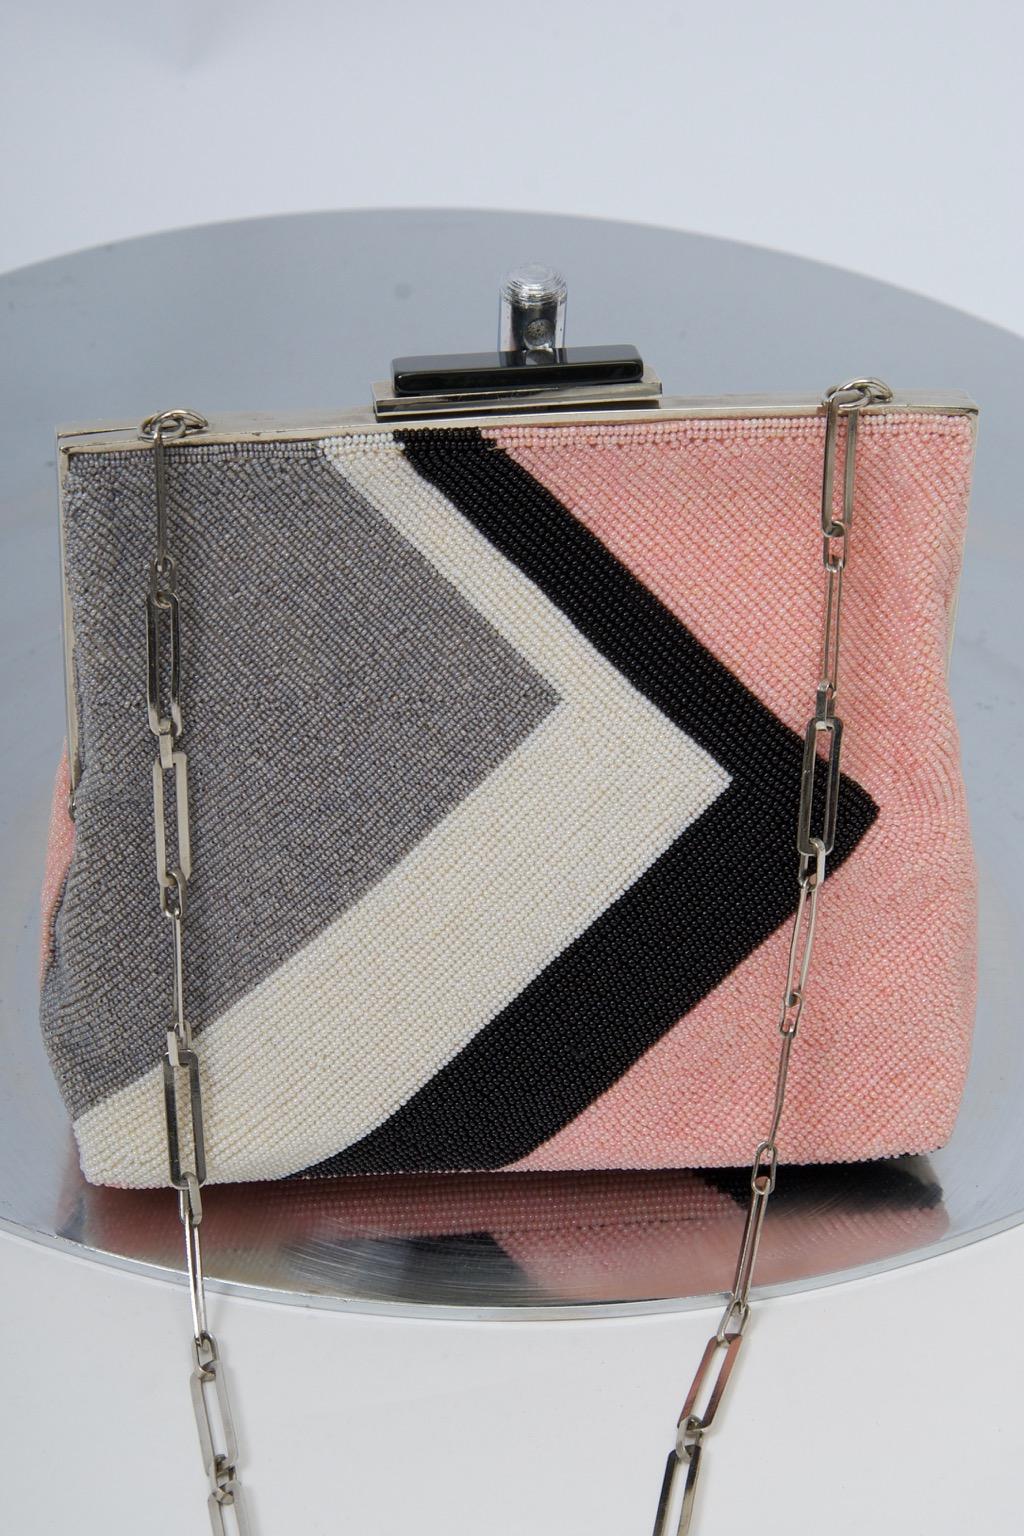 Pierre Cardin produced a line of beaded bags duirng his prime years that featured his favored geometric motifs and are highly collectible. This example, crafted of pink, gray, white and black micro beads, highlights a sideways V orientation, with